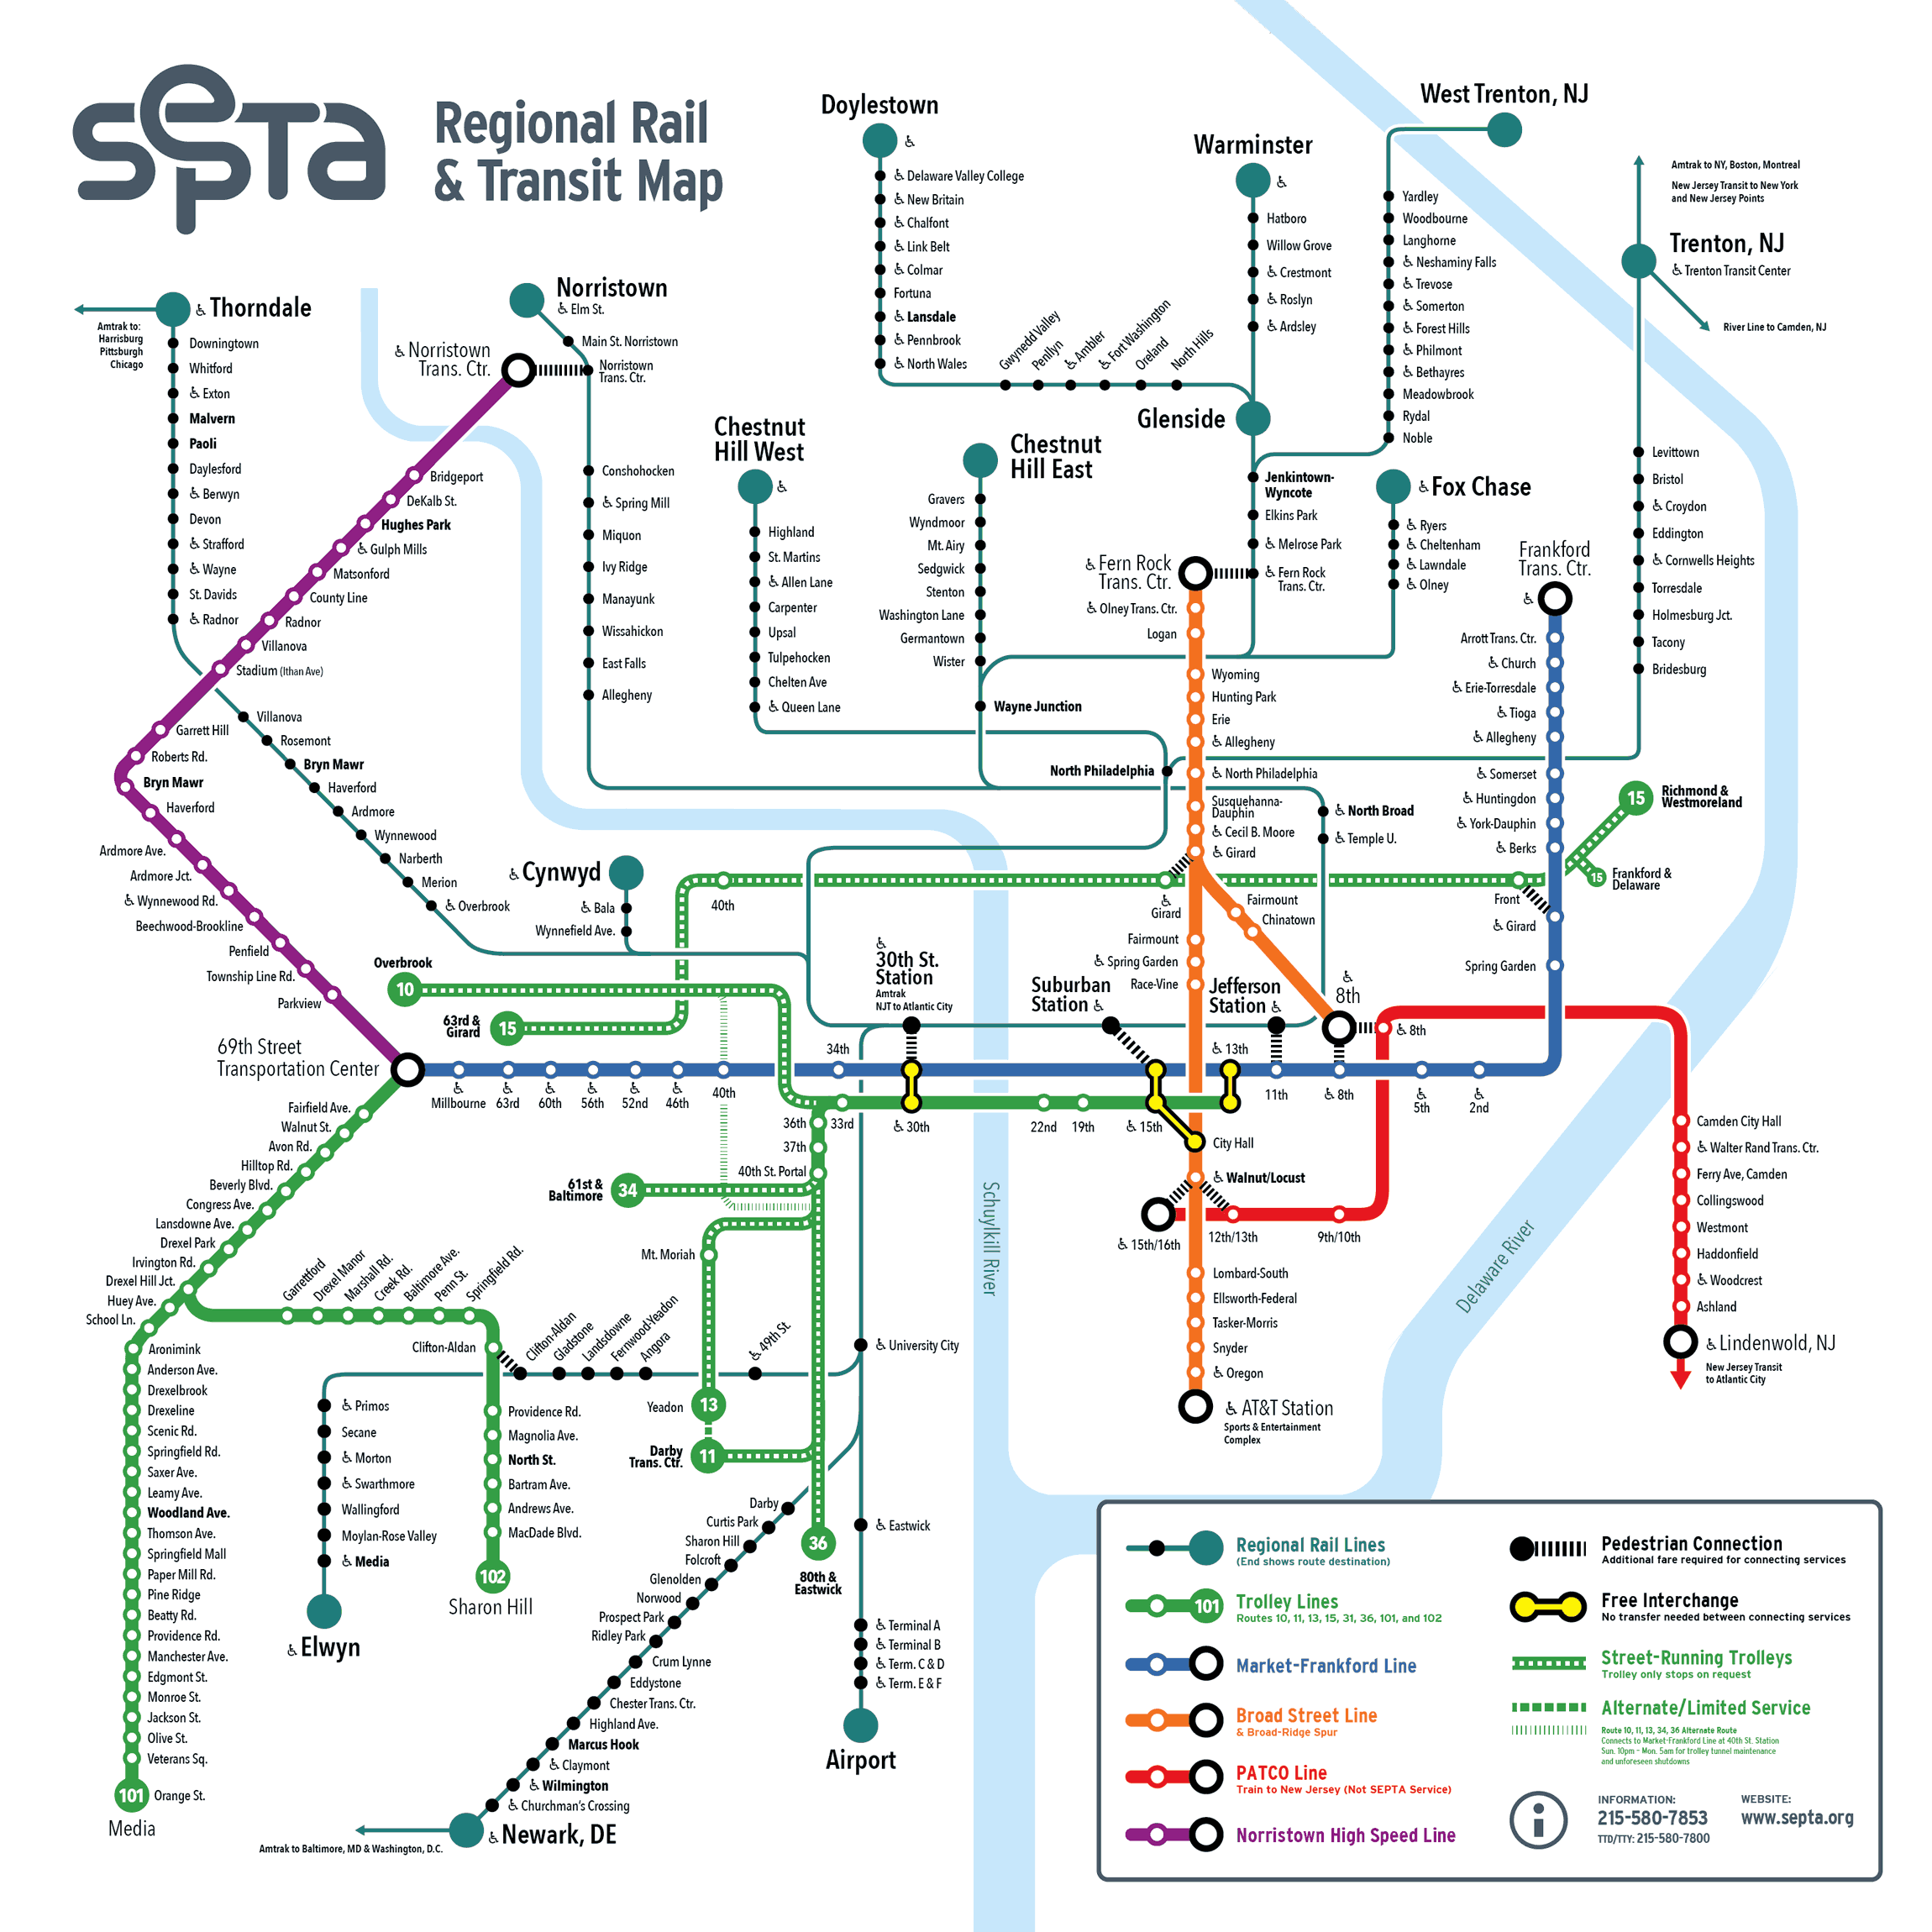 A redesigned transit system map for SEPTA showing their rail lines in the Philadelphia metropolitan area.